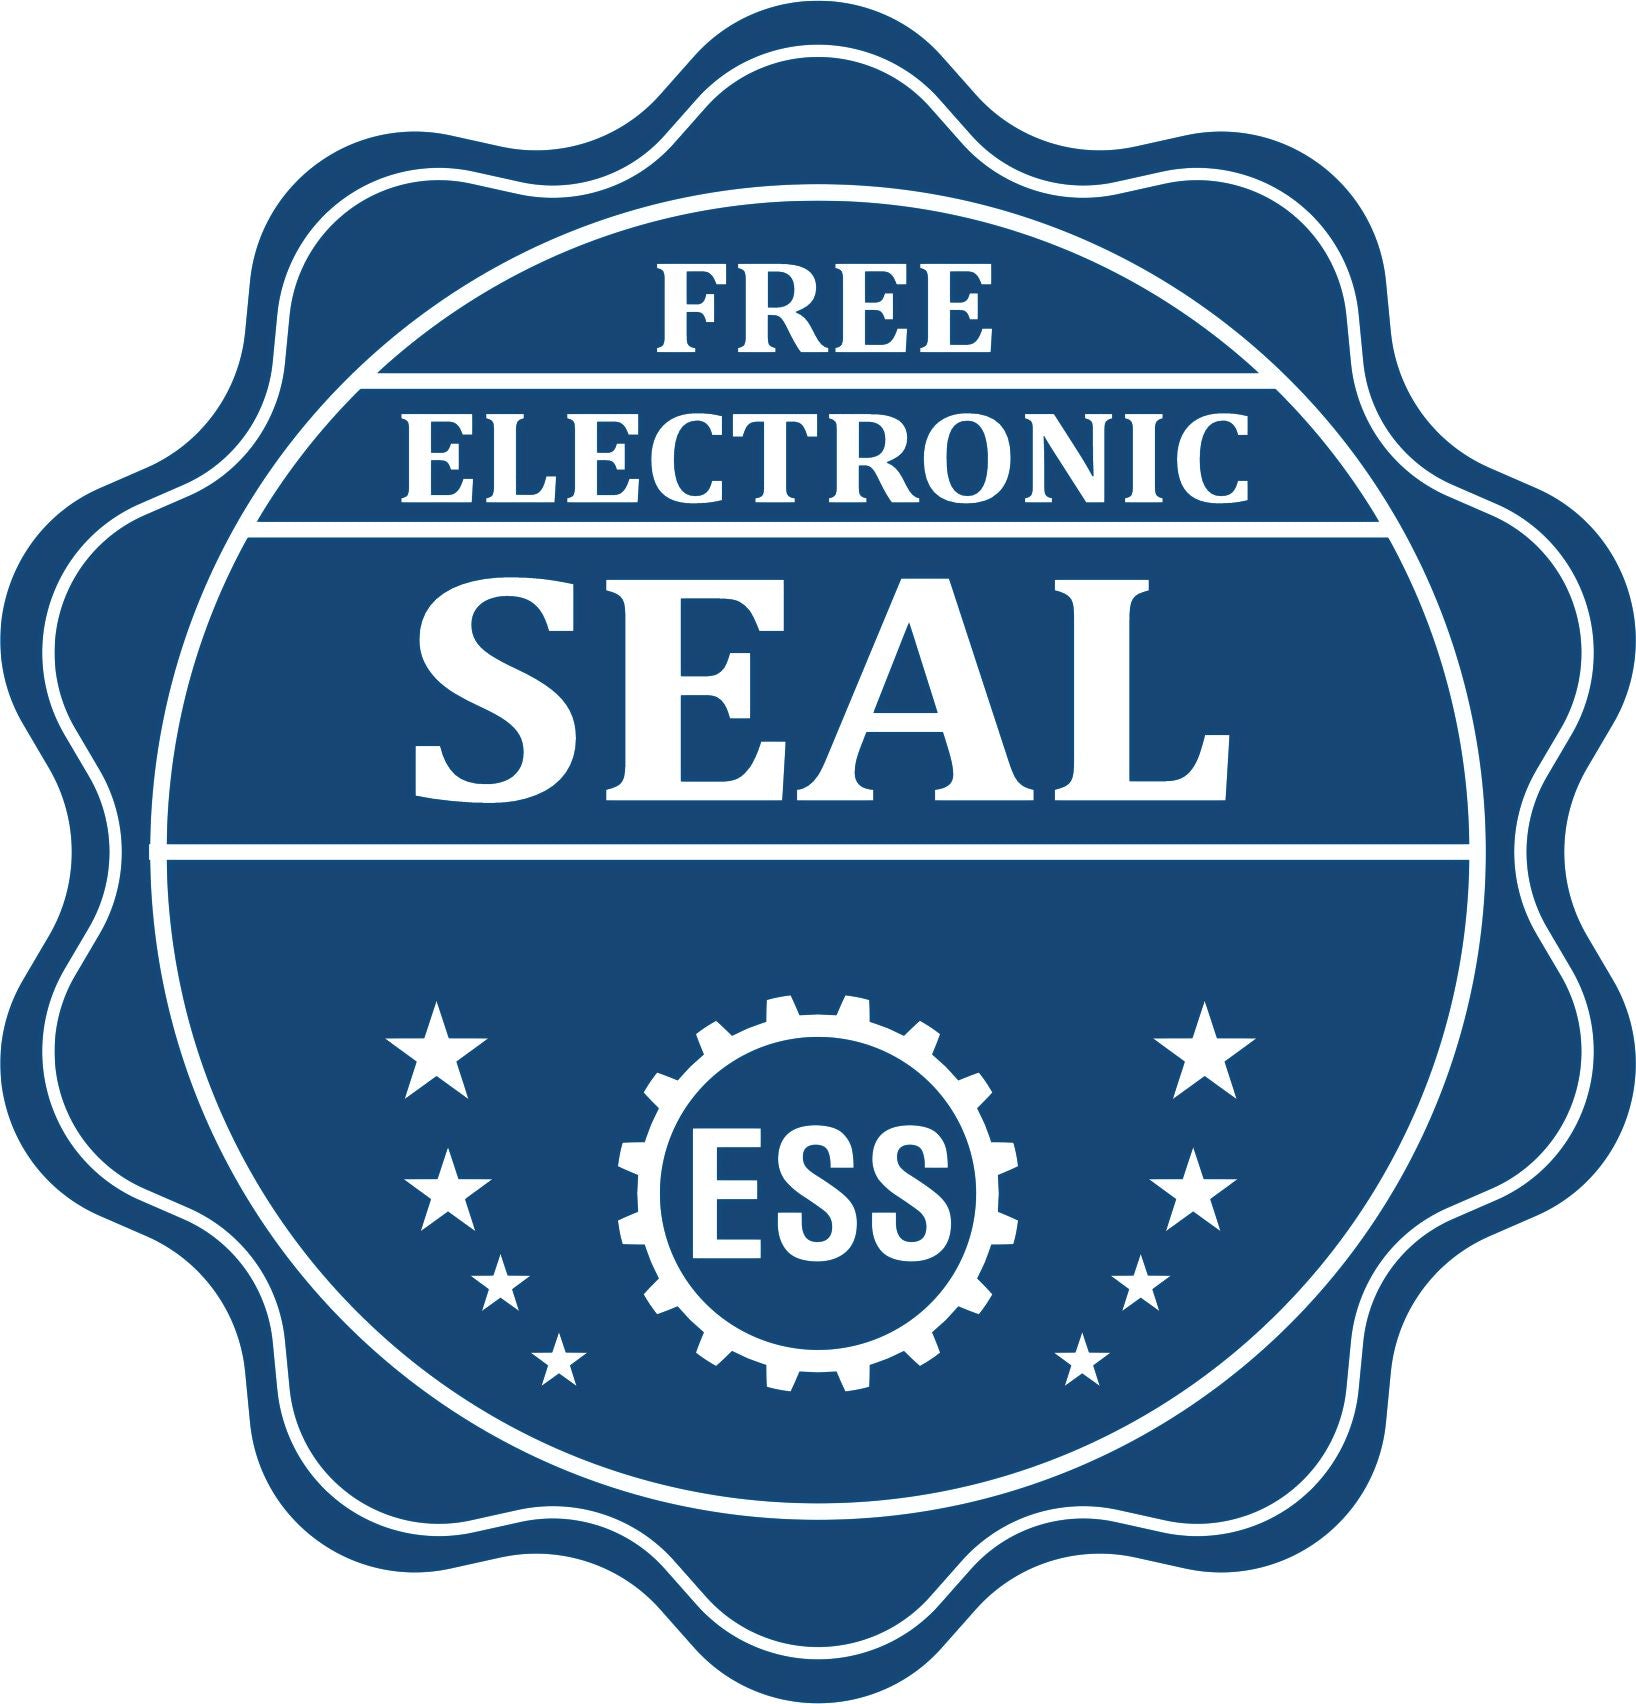 A badge showing a free electronic seal for the Premium MaxLight Pre-Inked Louisiana Landscape Architectural Stamp with stars and the ESS gear on the emblem.